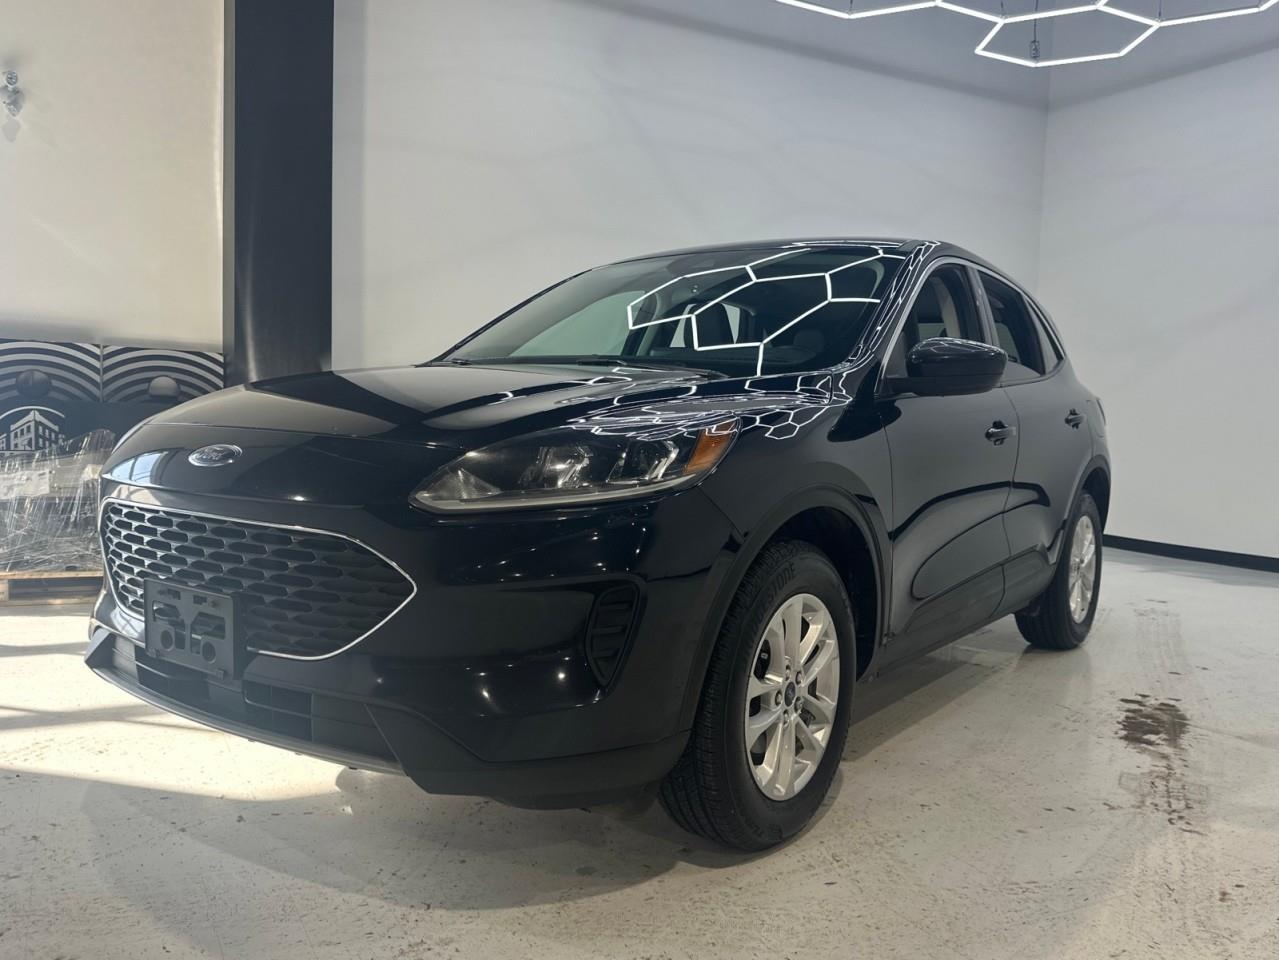 2022 Ford Escape SE Intelligent AWD System, All-Weather Capability,